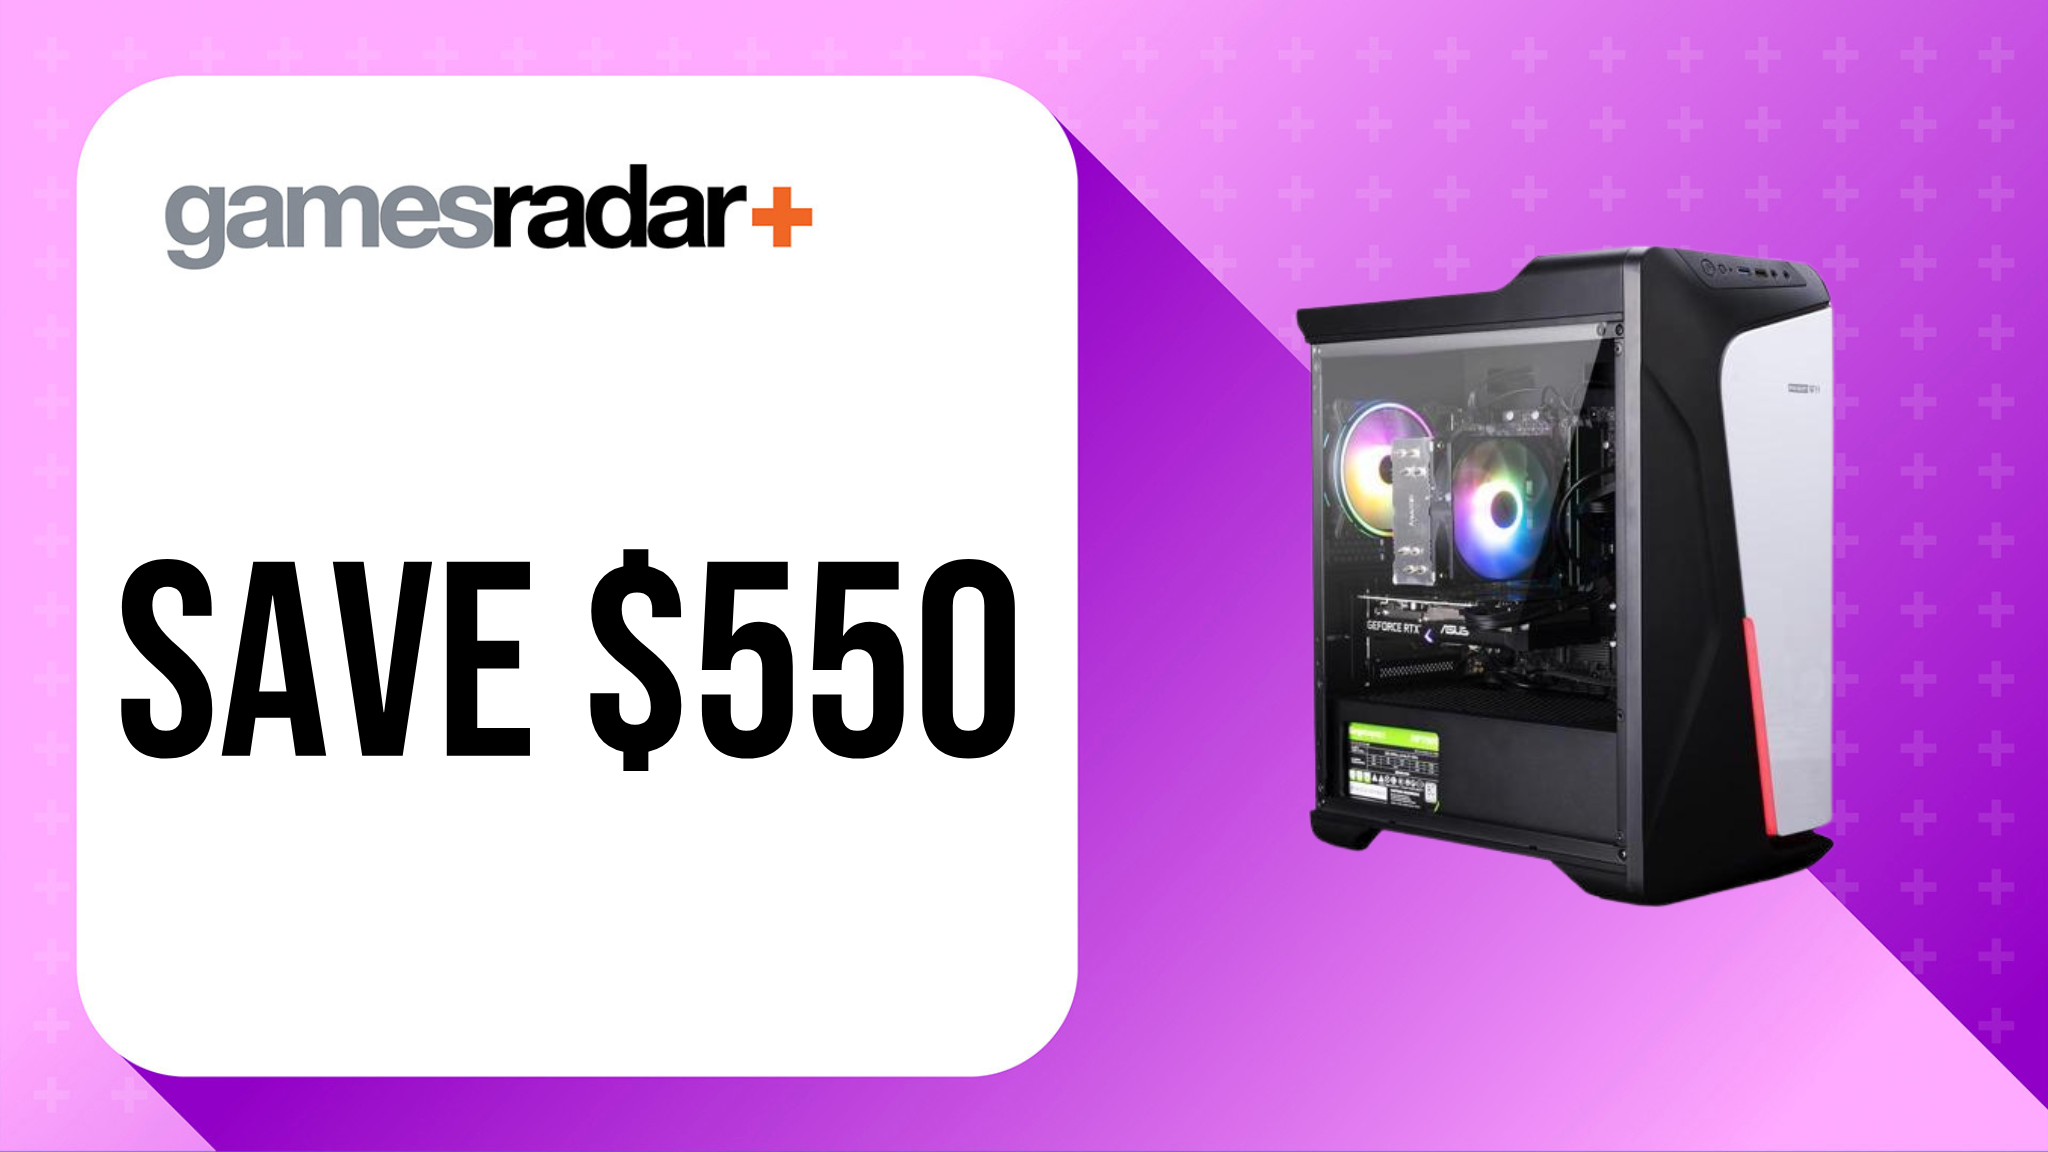 IPASON gaming desktop deal with $550 saving stamp and purple background